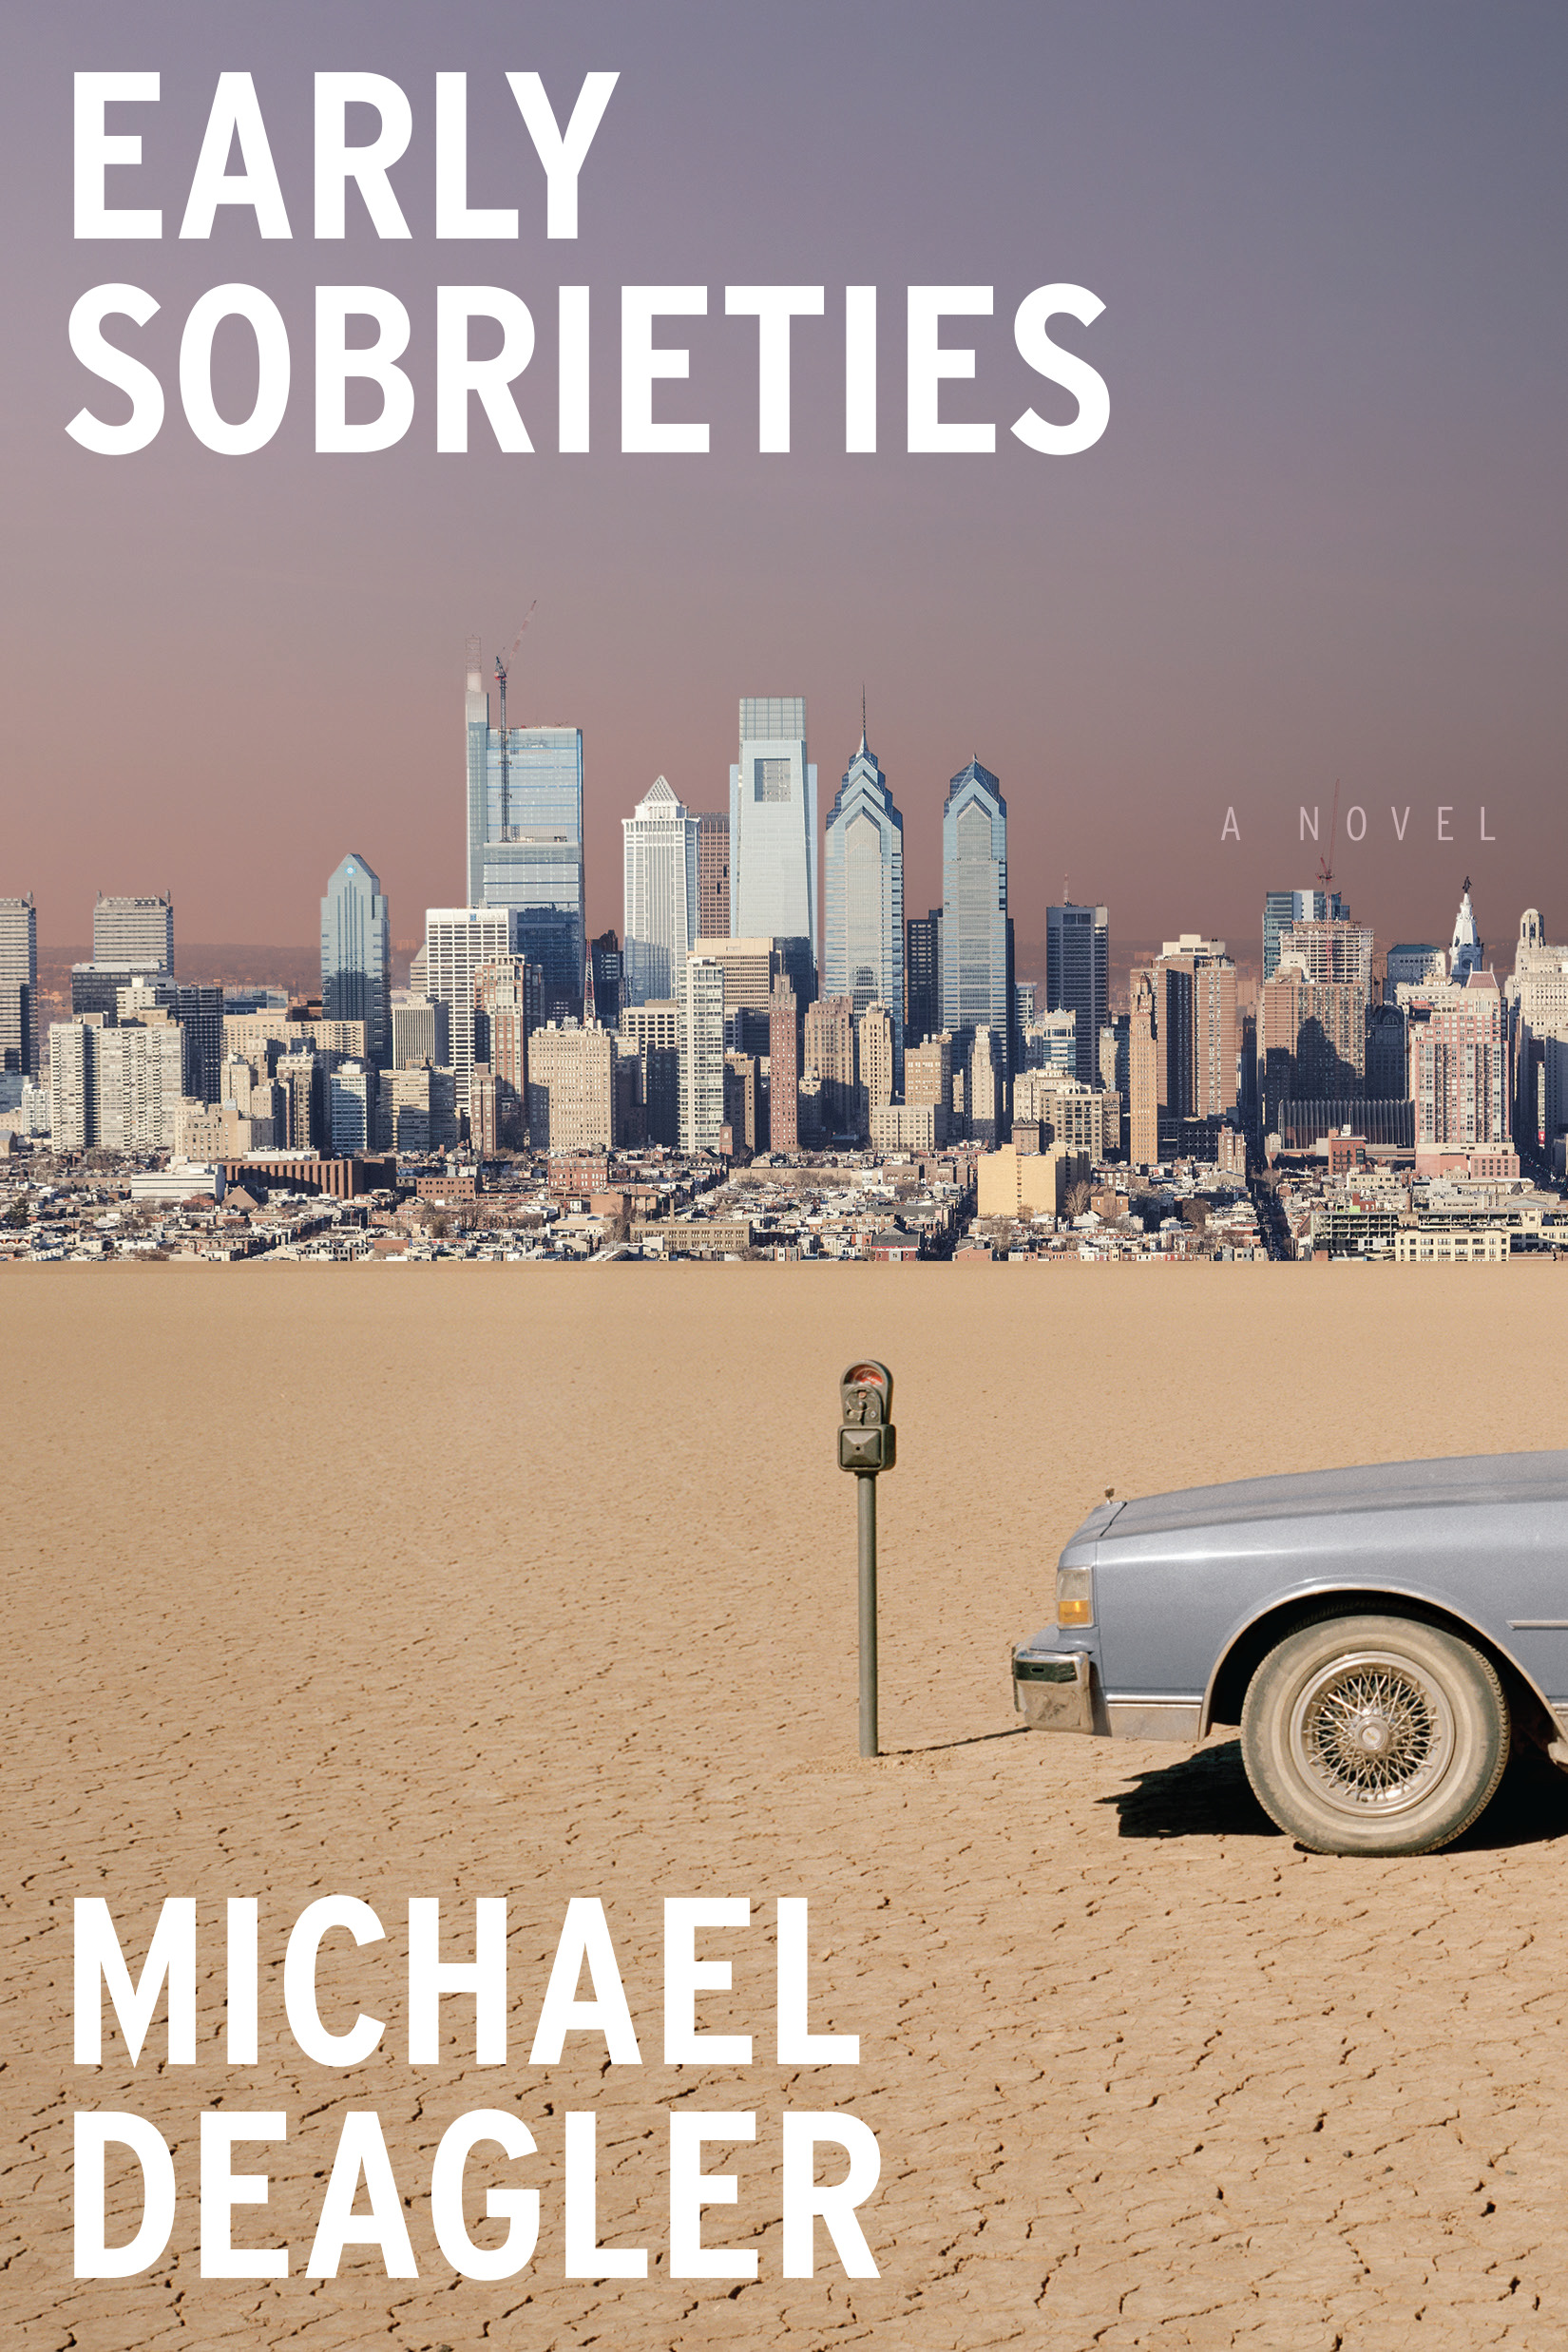 Book Launch: Early Sobrieties by Michael Deagler